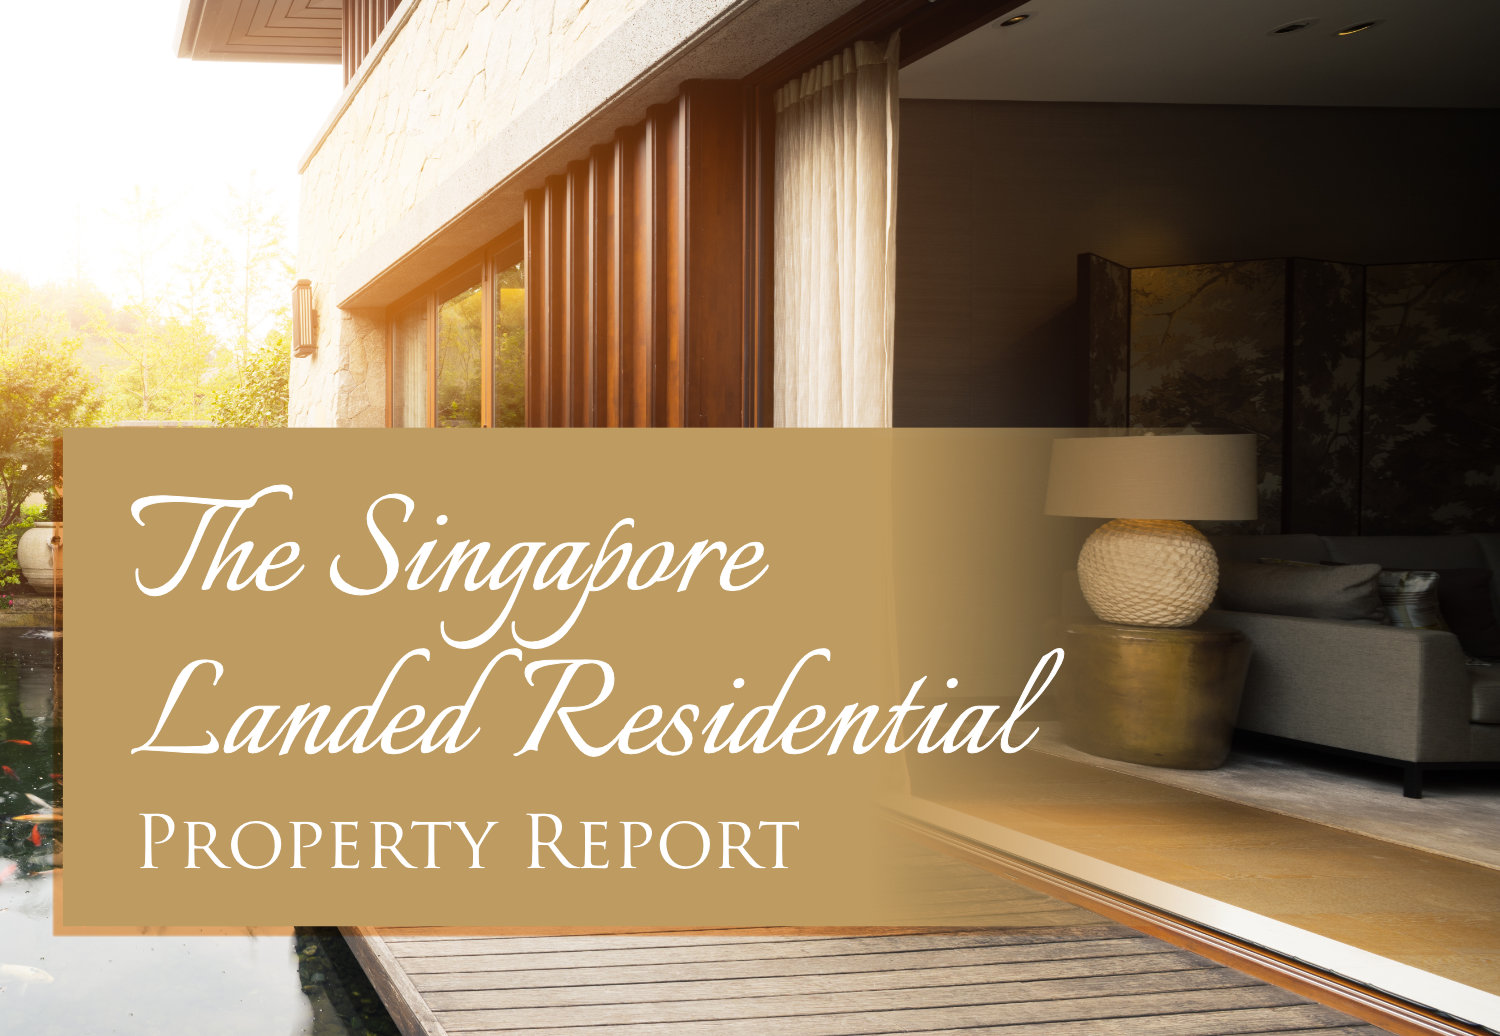 An open sliding door reveals a modern living area with a couch and lamp; text reads, "The Singapore Landed Residential Property Report." Learn key insights for estate planning in Singapore.